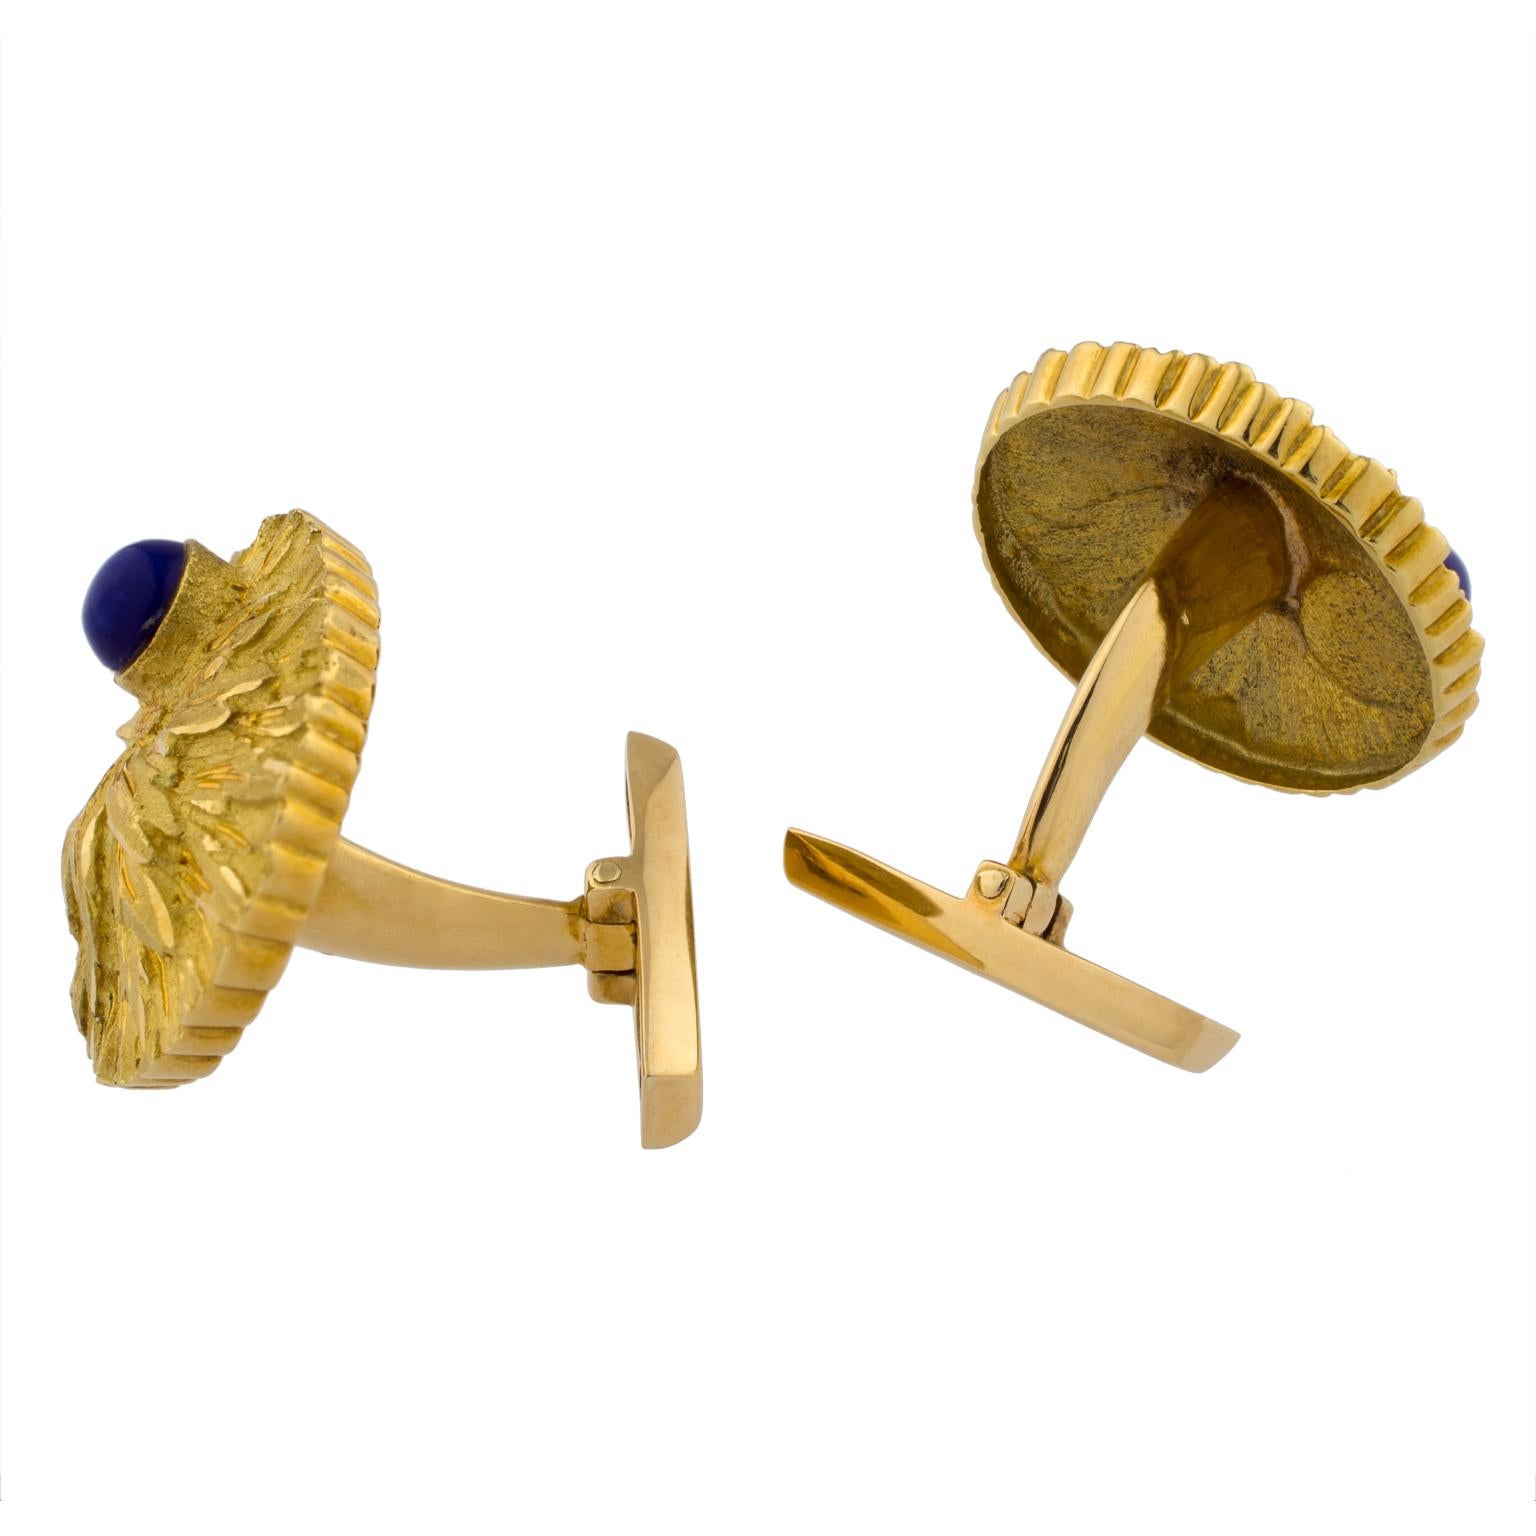 Round cufflinks in 18K yellow gold, with texturized leaf motifs, decorated with two cabochon lapis lazulis.
Diameter: 22 mm (0.87 in)